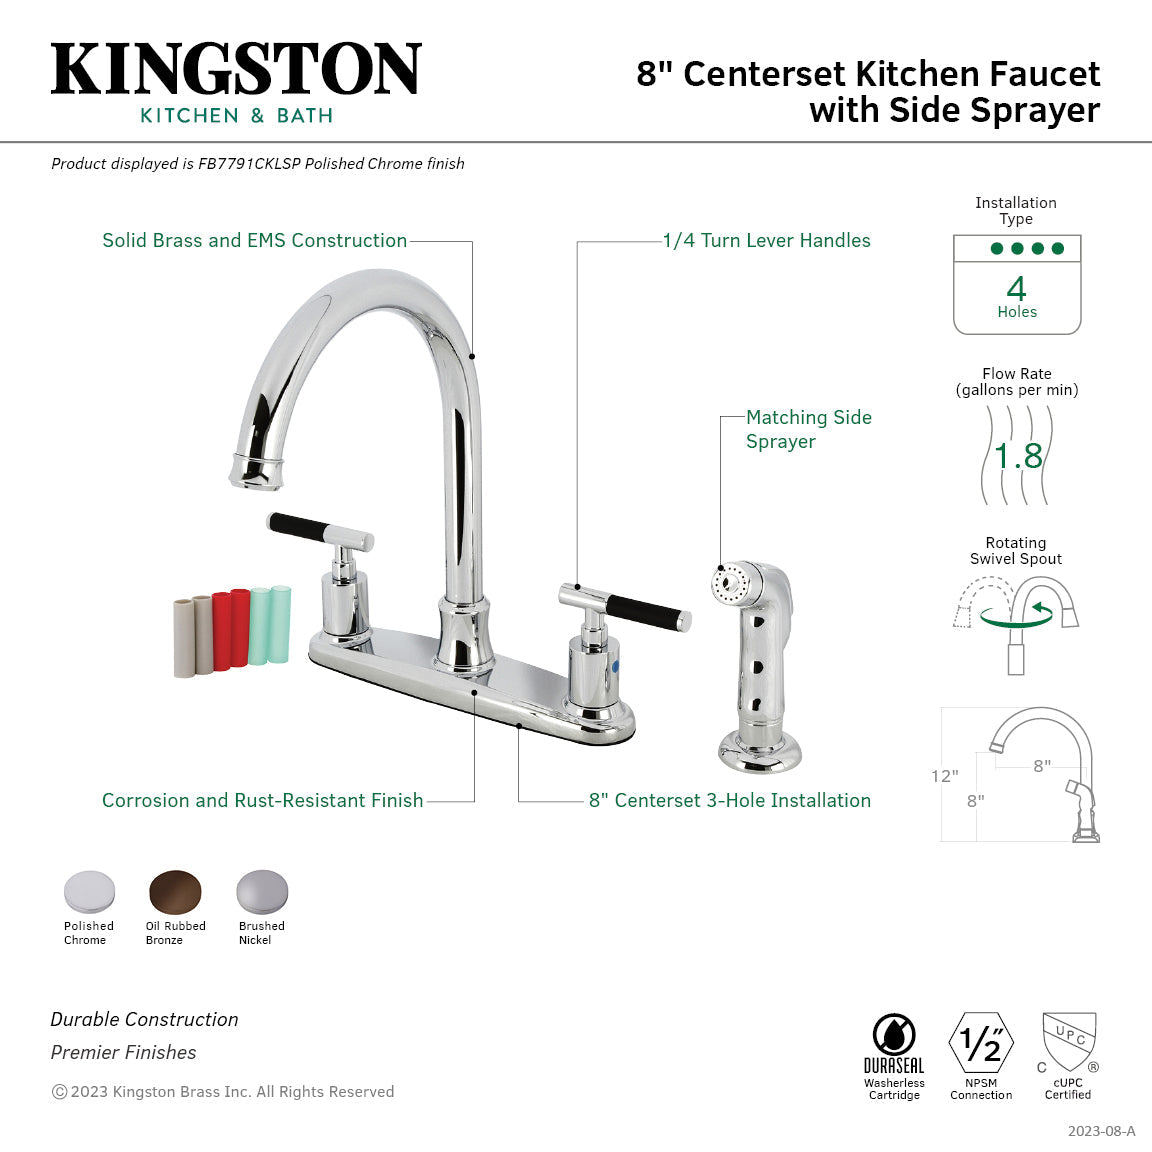 Kaiser FB7791CKLSP Two-Handle 4-Hole Deck Mount 8" Centerset Kitchen Faucet with Side Sprayer, Polished Chrome